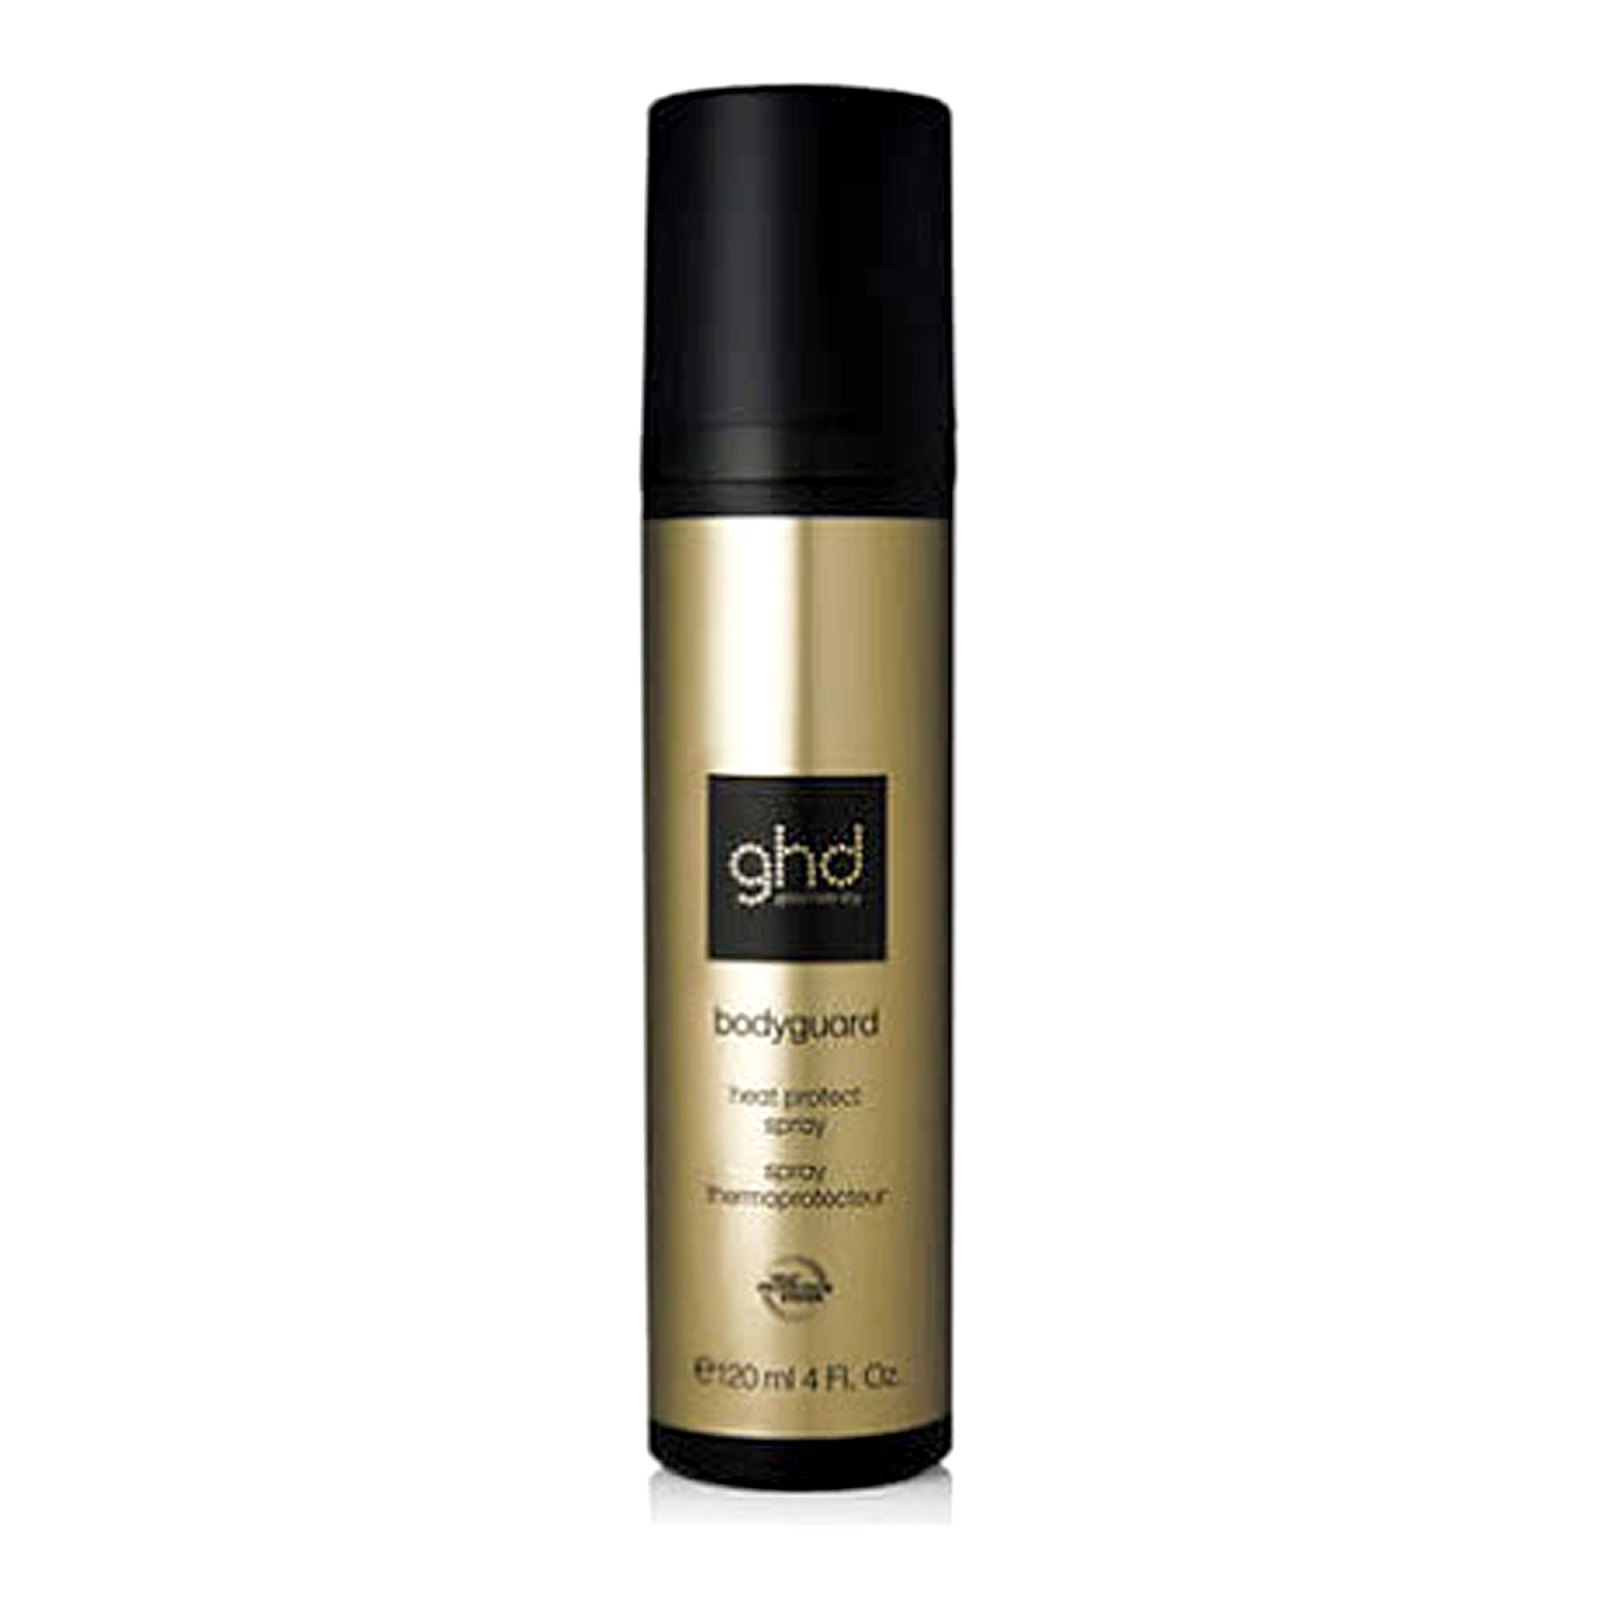 GHD Heat Protect Spray Shop Best Makeup,Haircare Skincare Other Beauty Must-Haves 2021